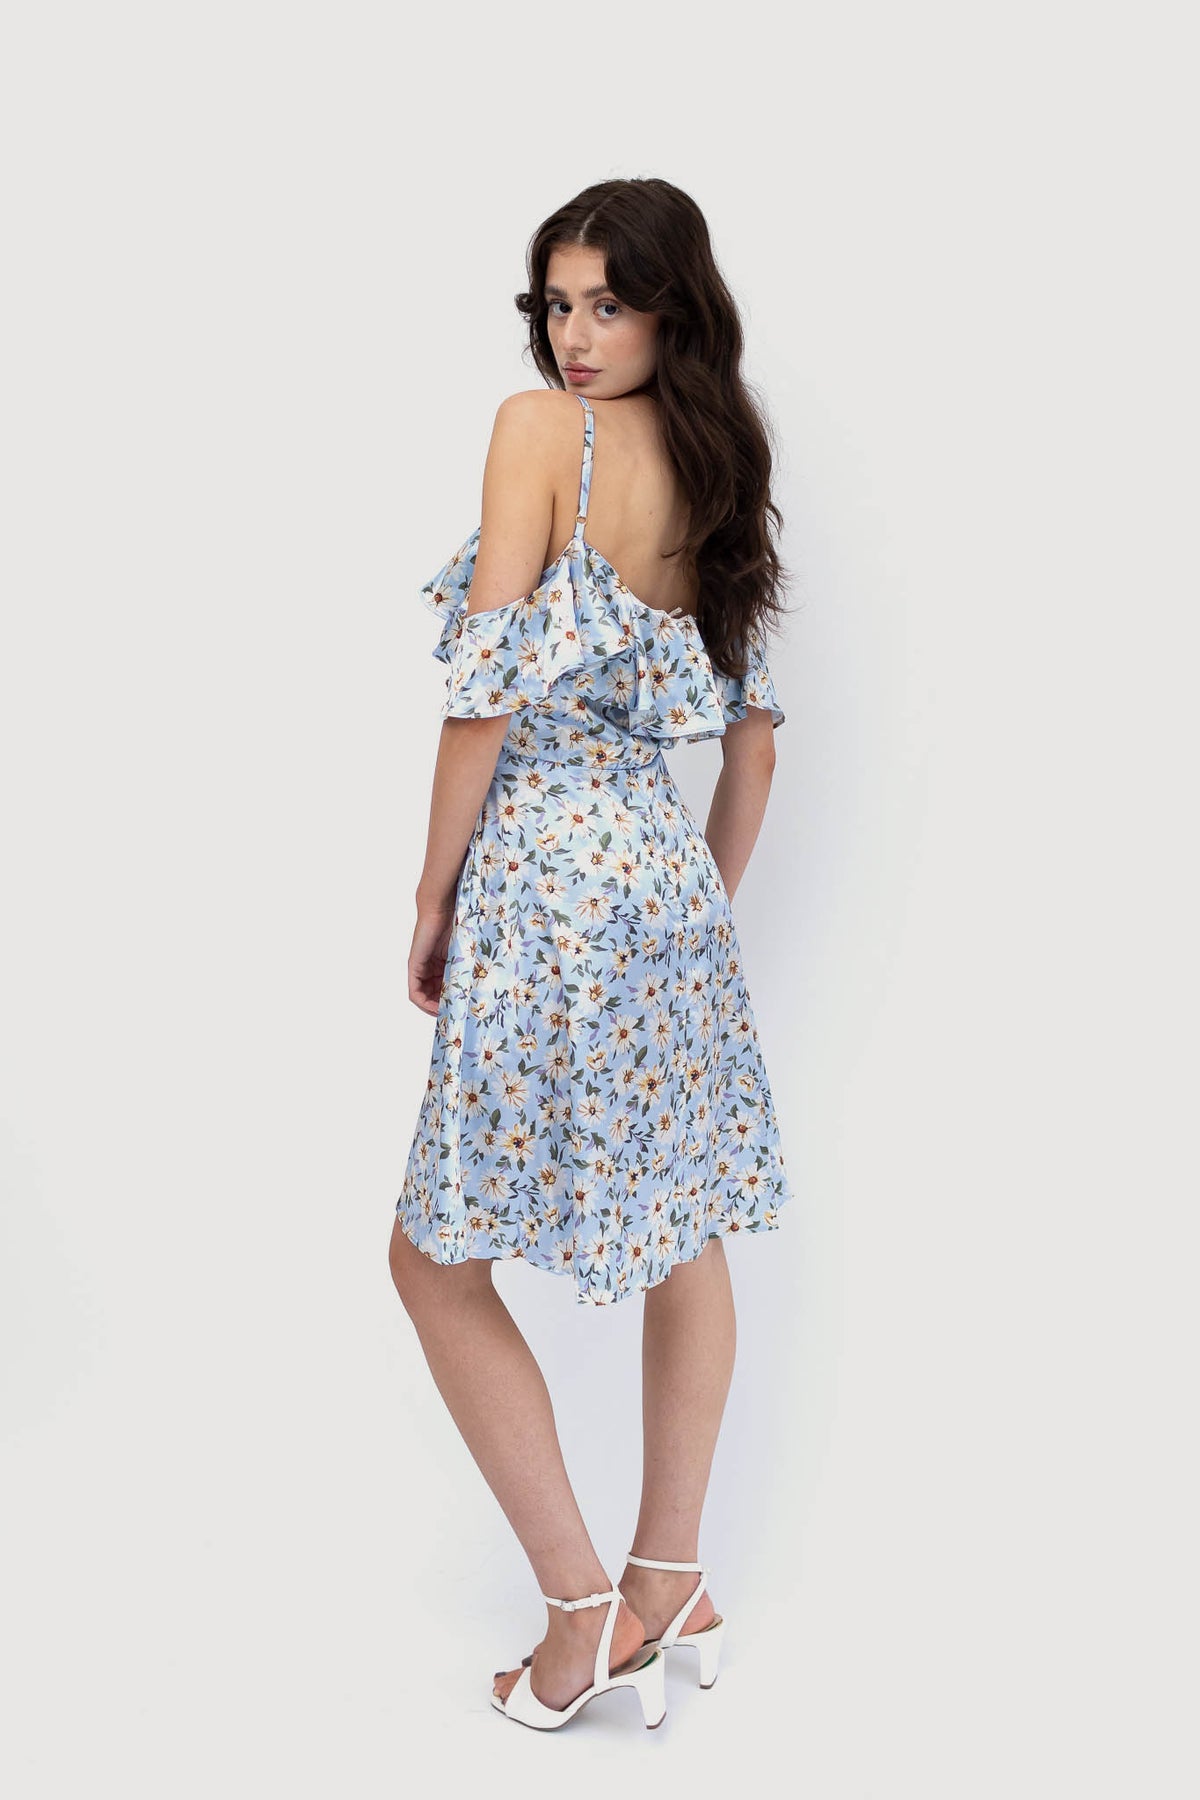 Model wears light blue off the shoulder mini dress with a floral pattern. Showing the back of dress.